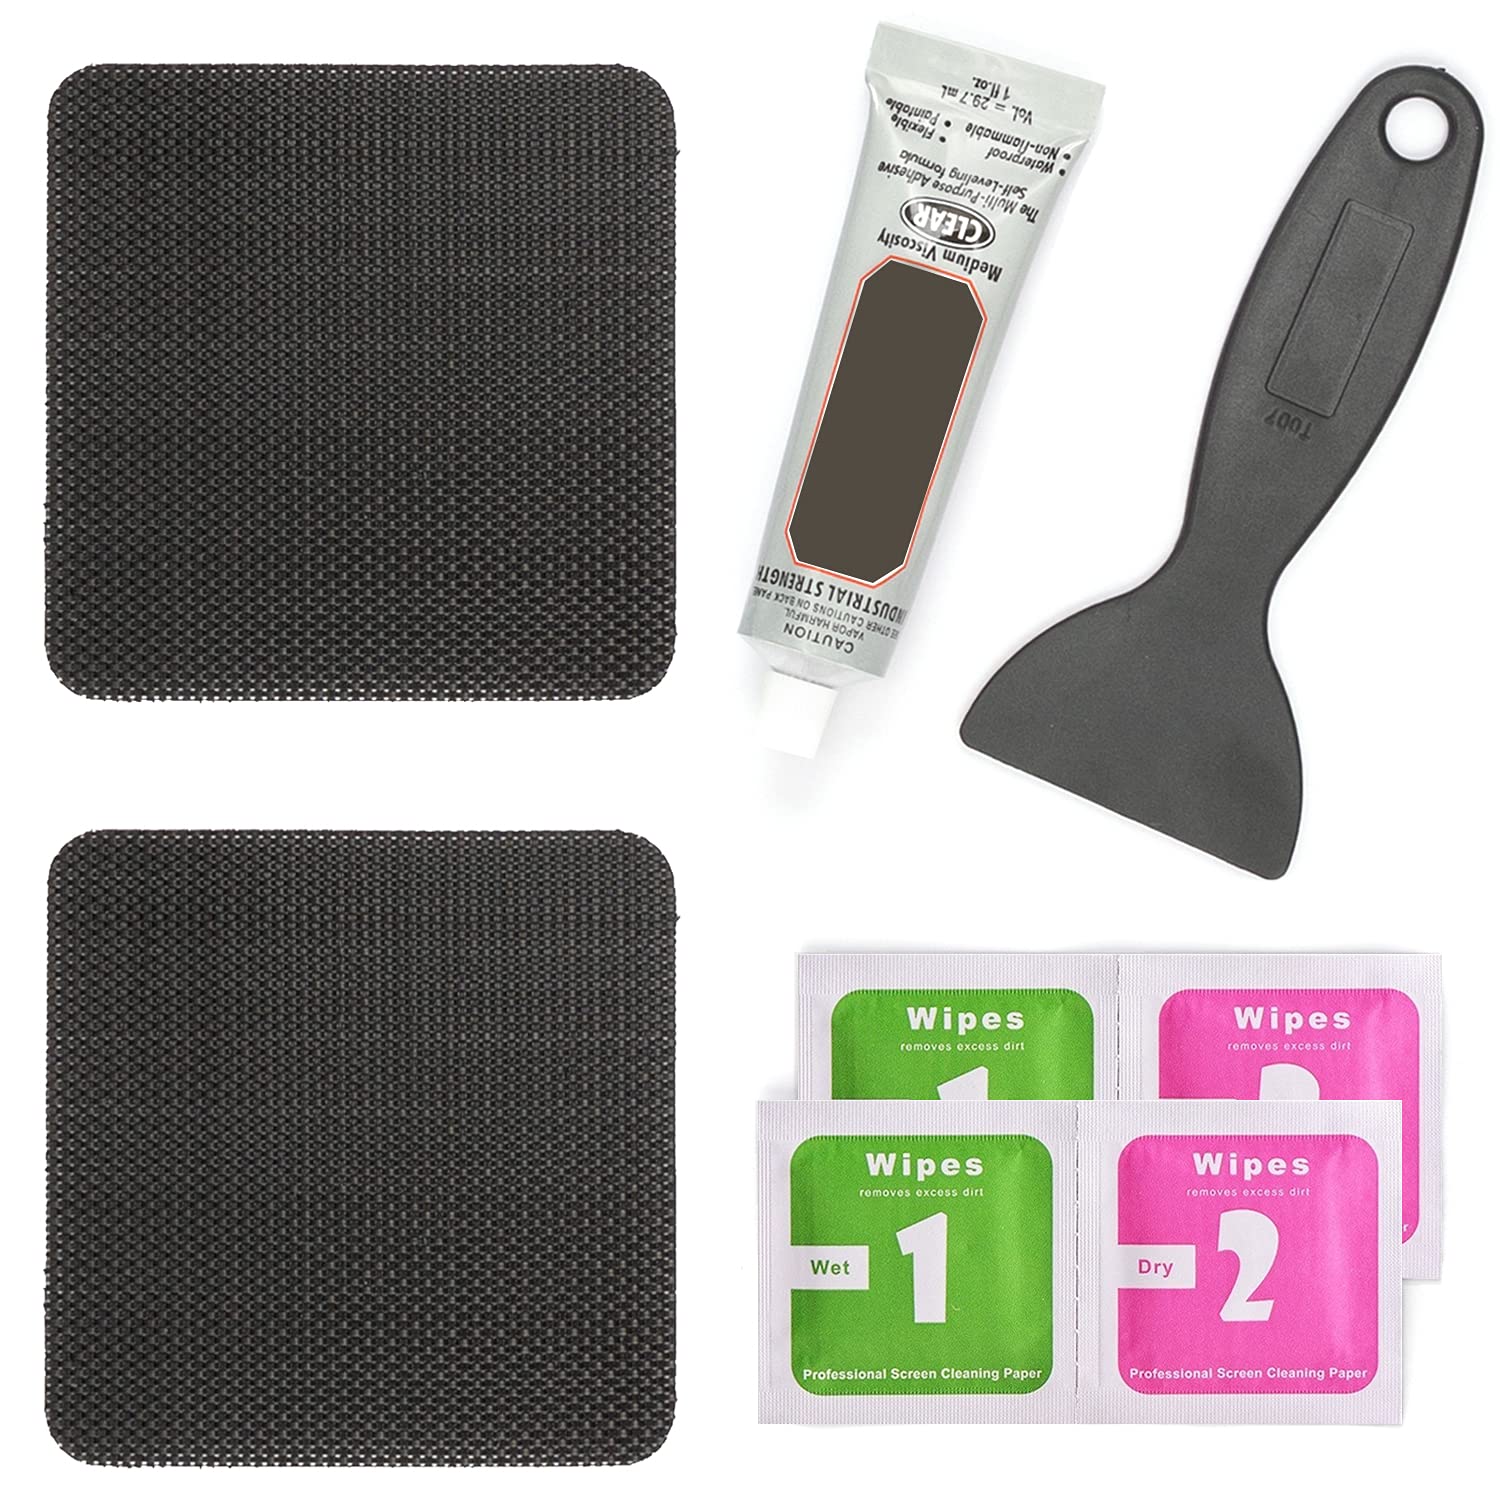 ifeolo Trampoline Patch Repair Kit 4X 4 Square On Patches Repair Trampoline Mat Tear Or Hole In A Trampoline Mat(2 Piece)